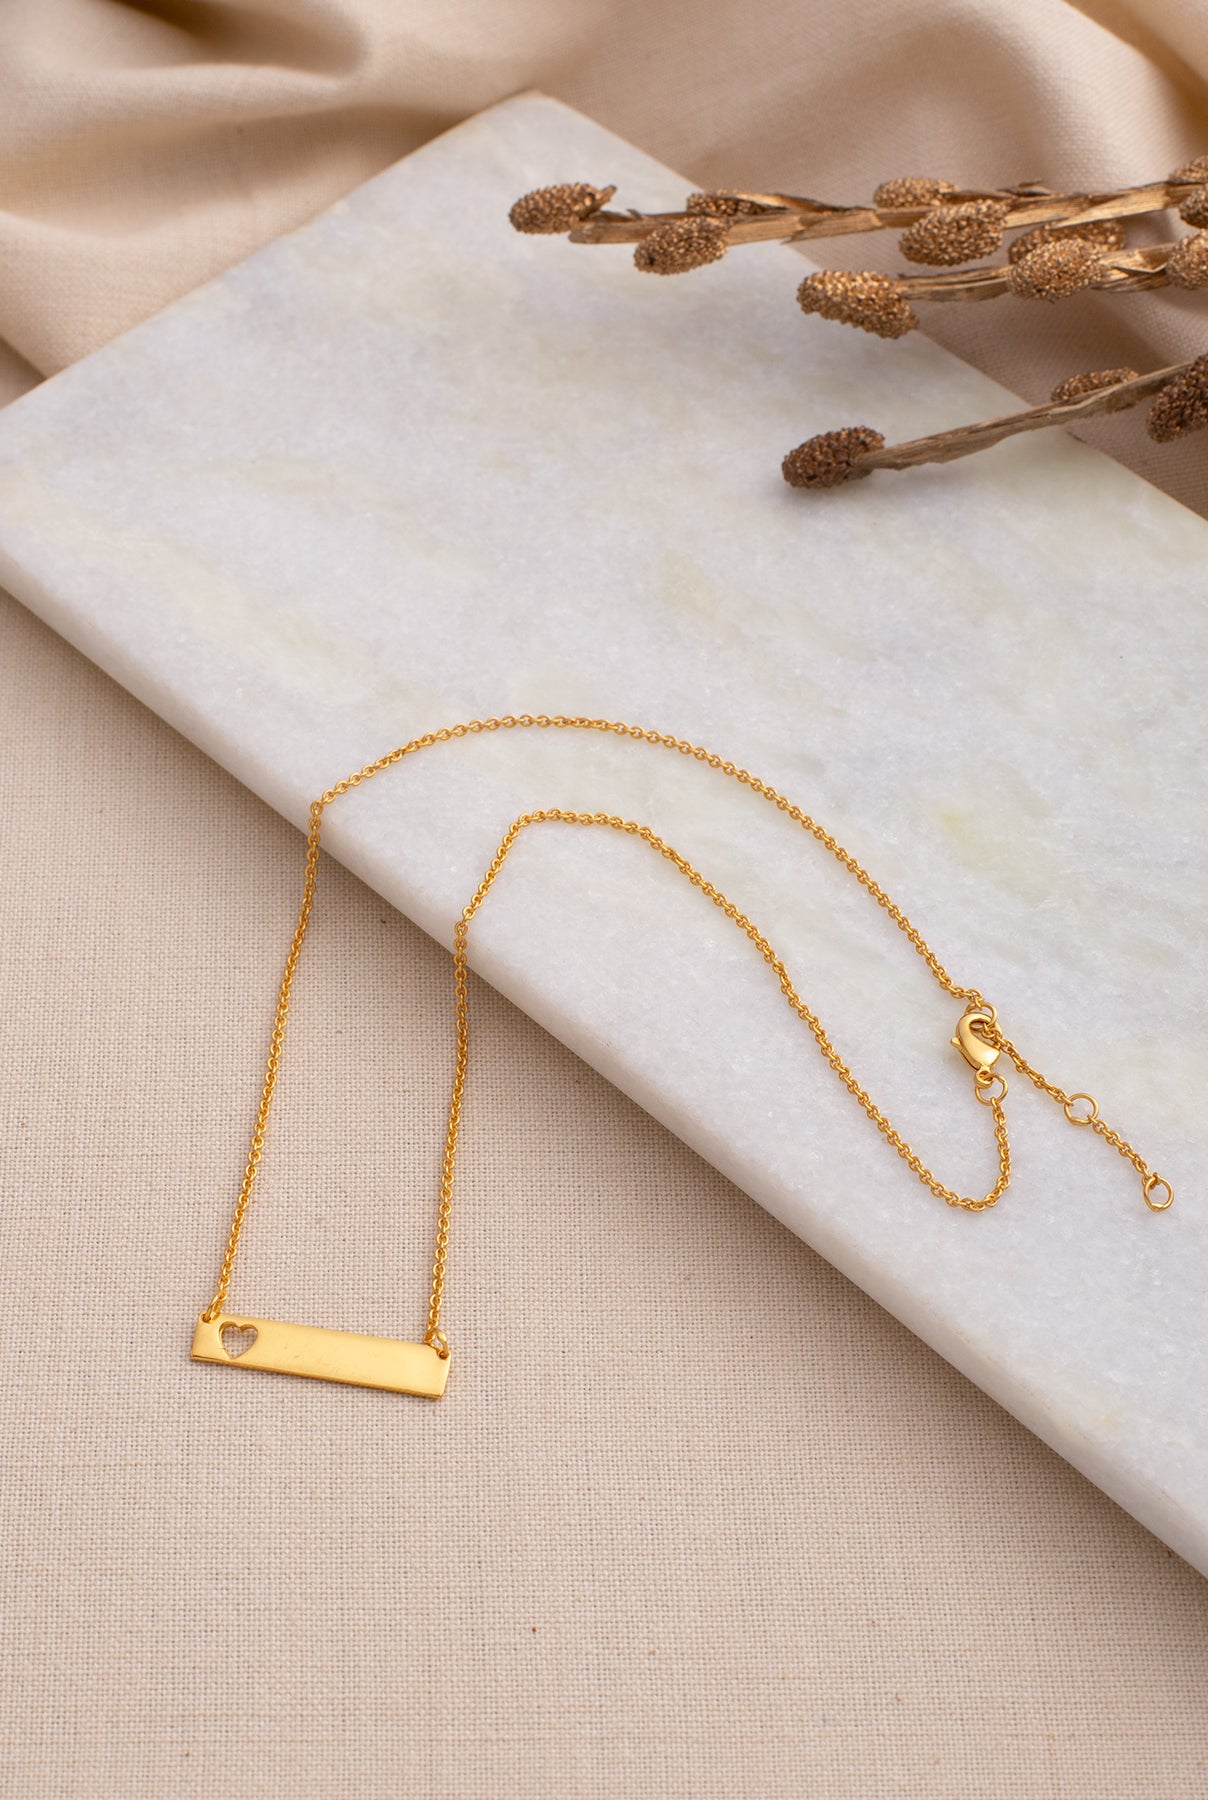 The Golden Couer Necklace